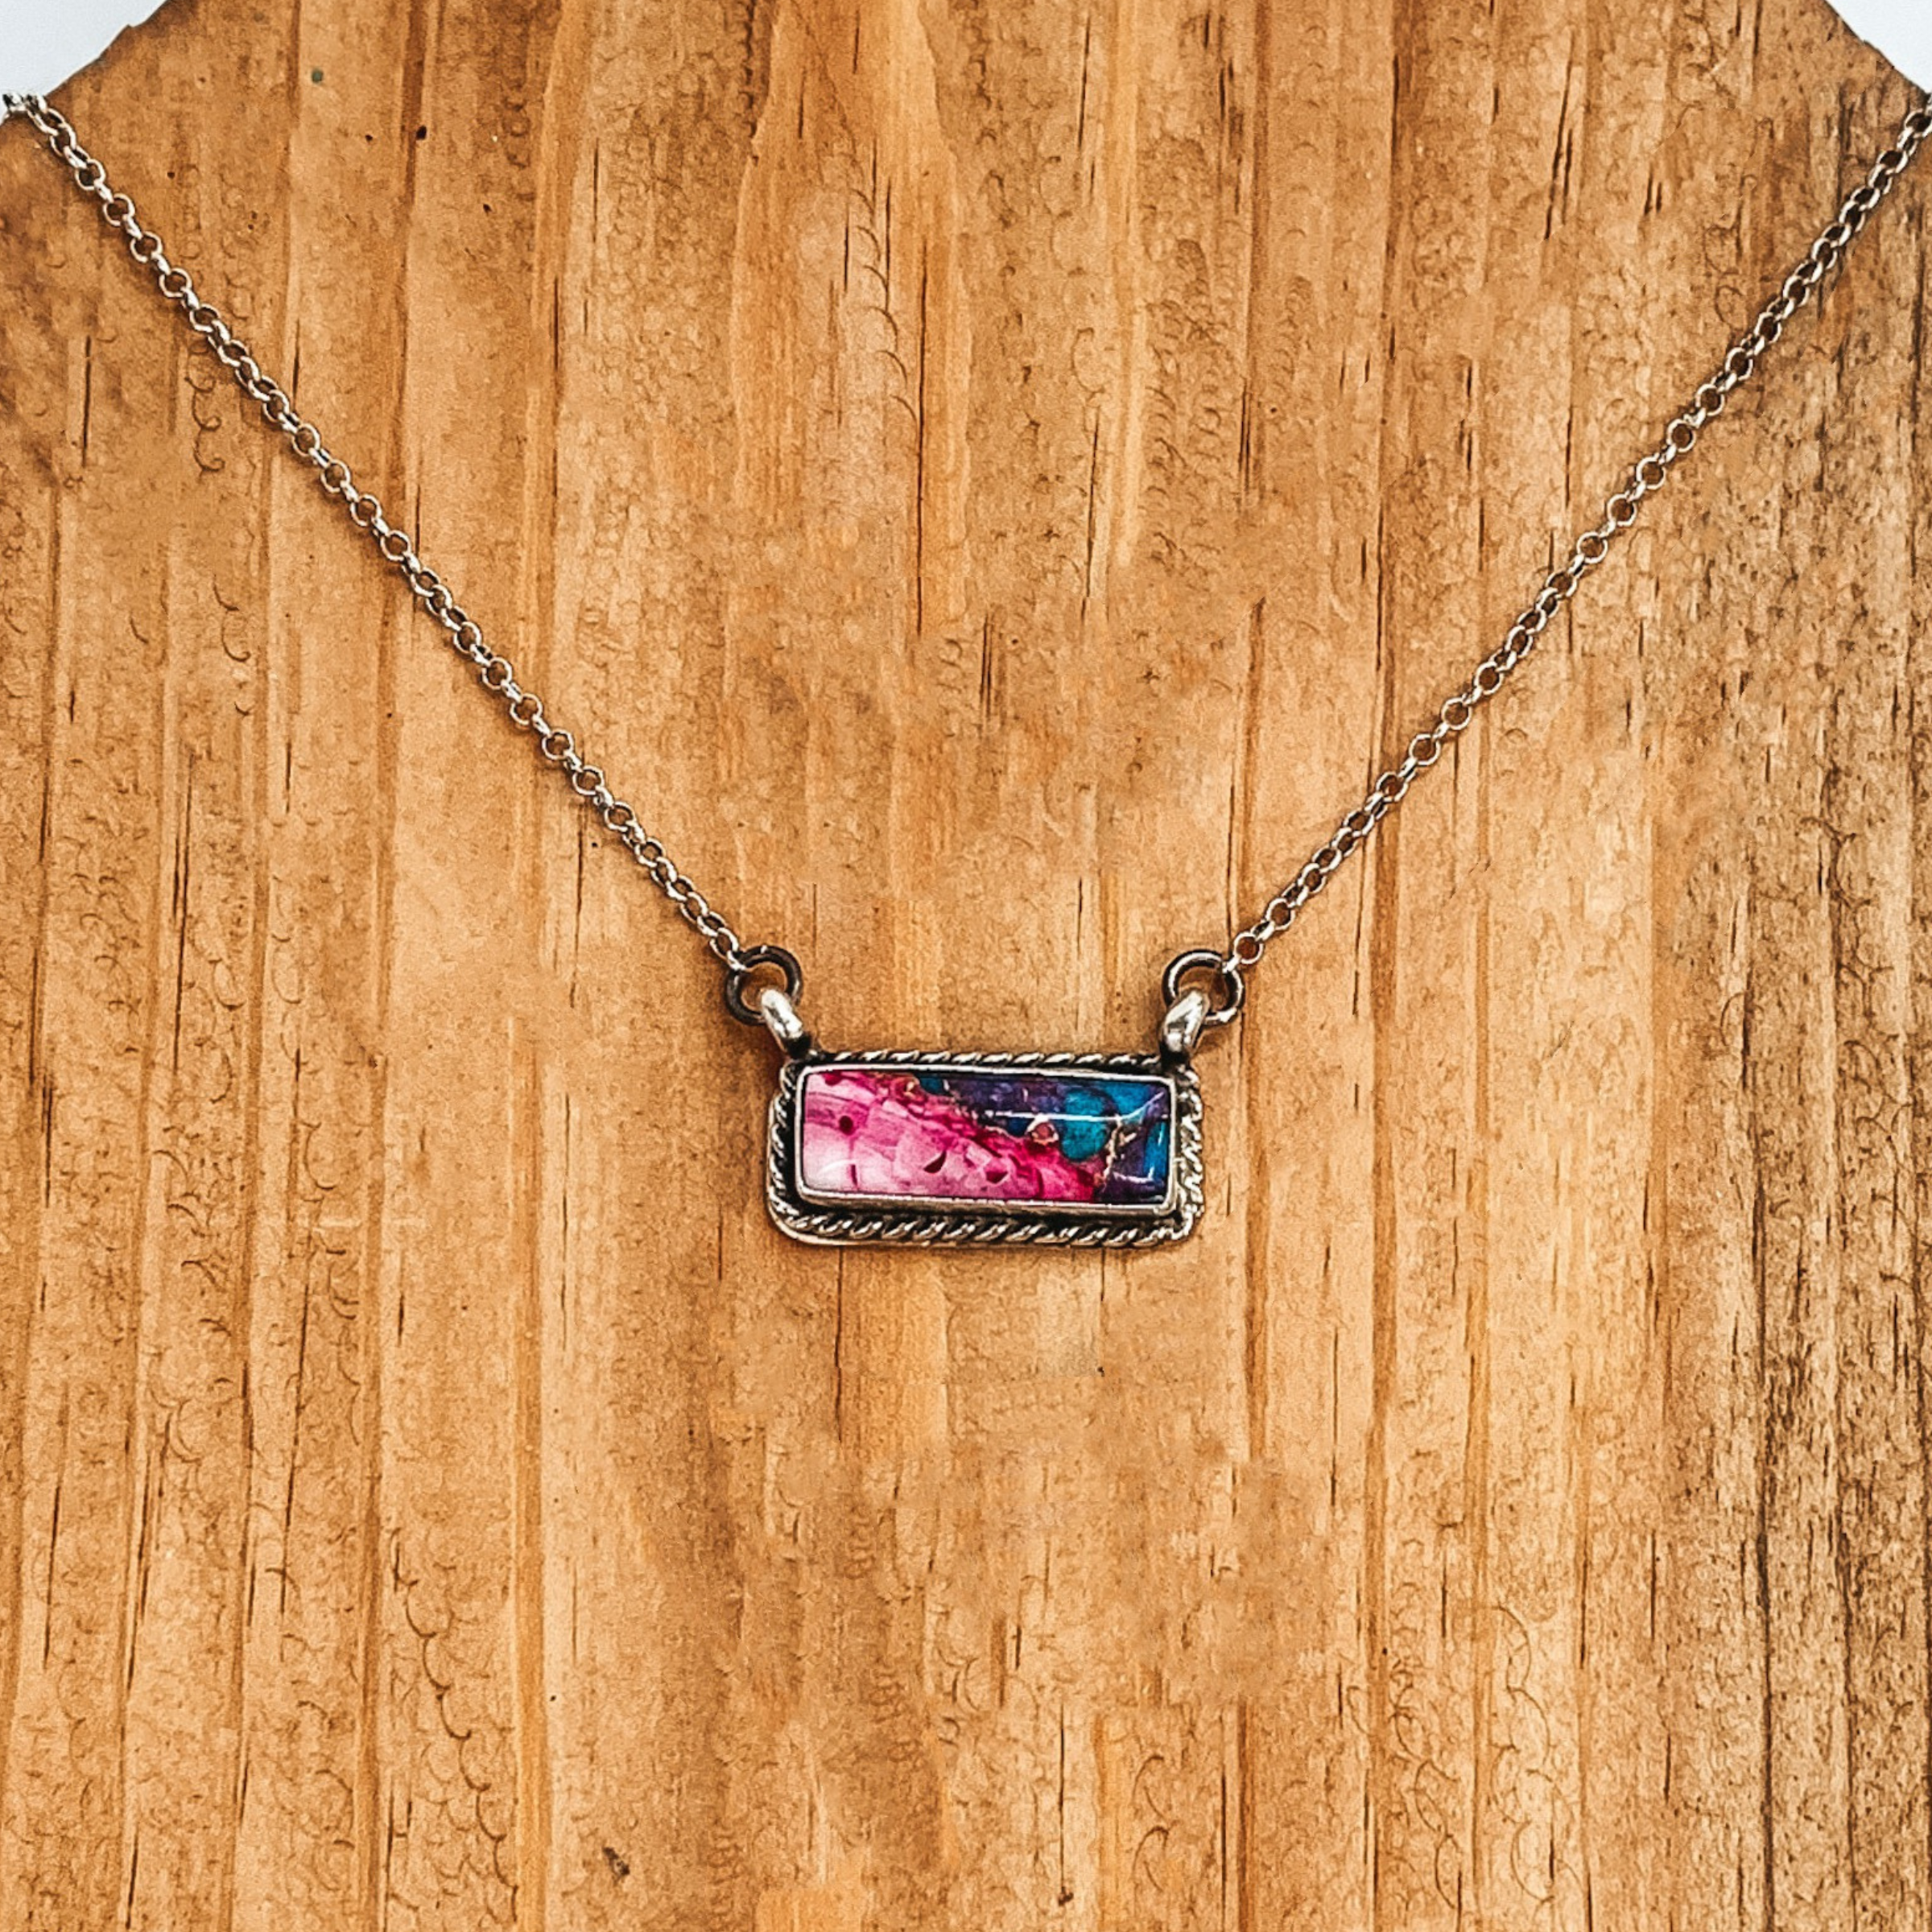 Silver chain necklace with rectangle bar pendant. The pendant has a silver outline with a pink, turquoise, and purple mix of colors. This necklace is pictured on a brown wood background. 